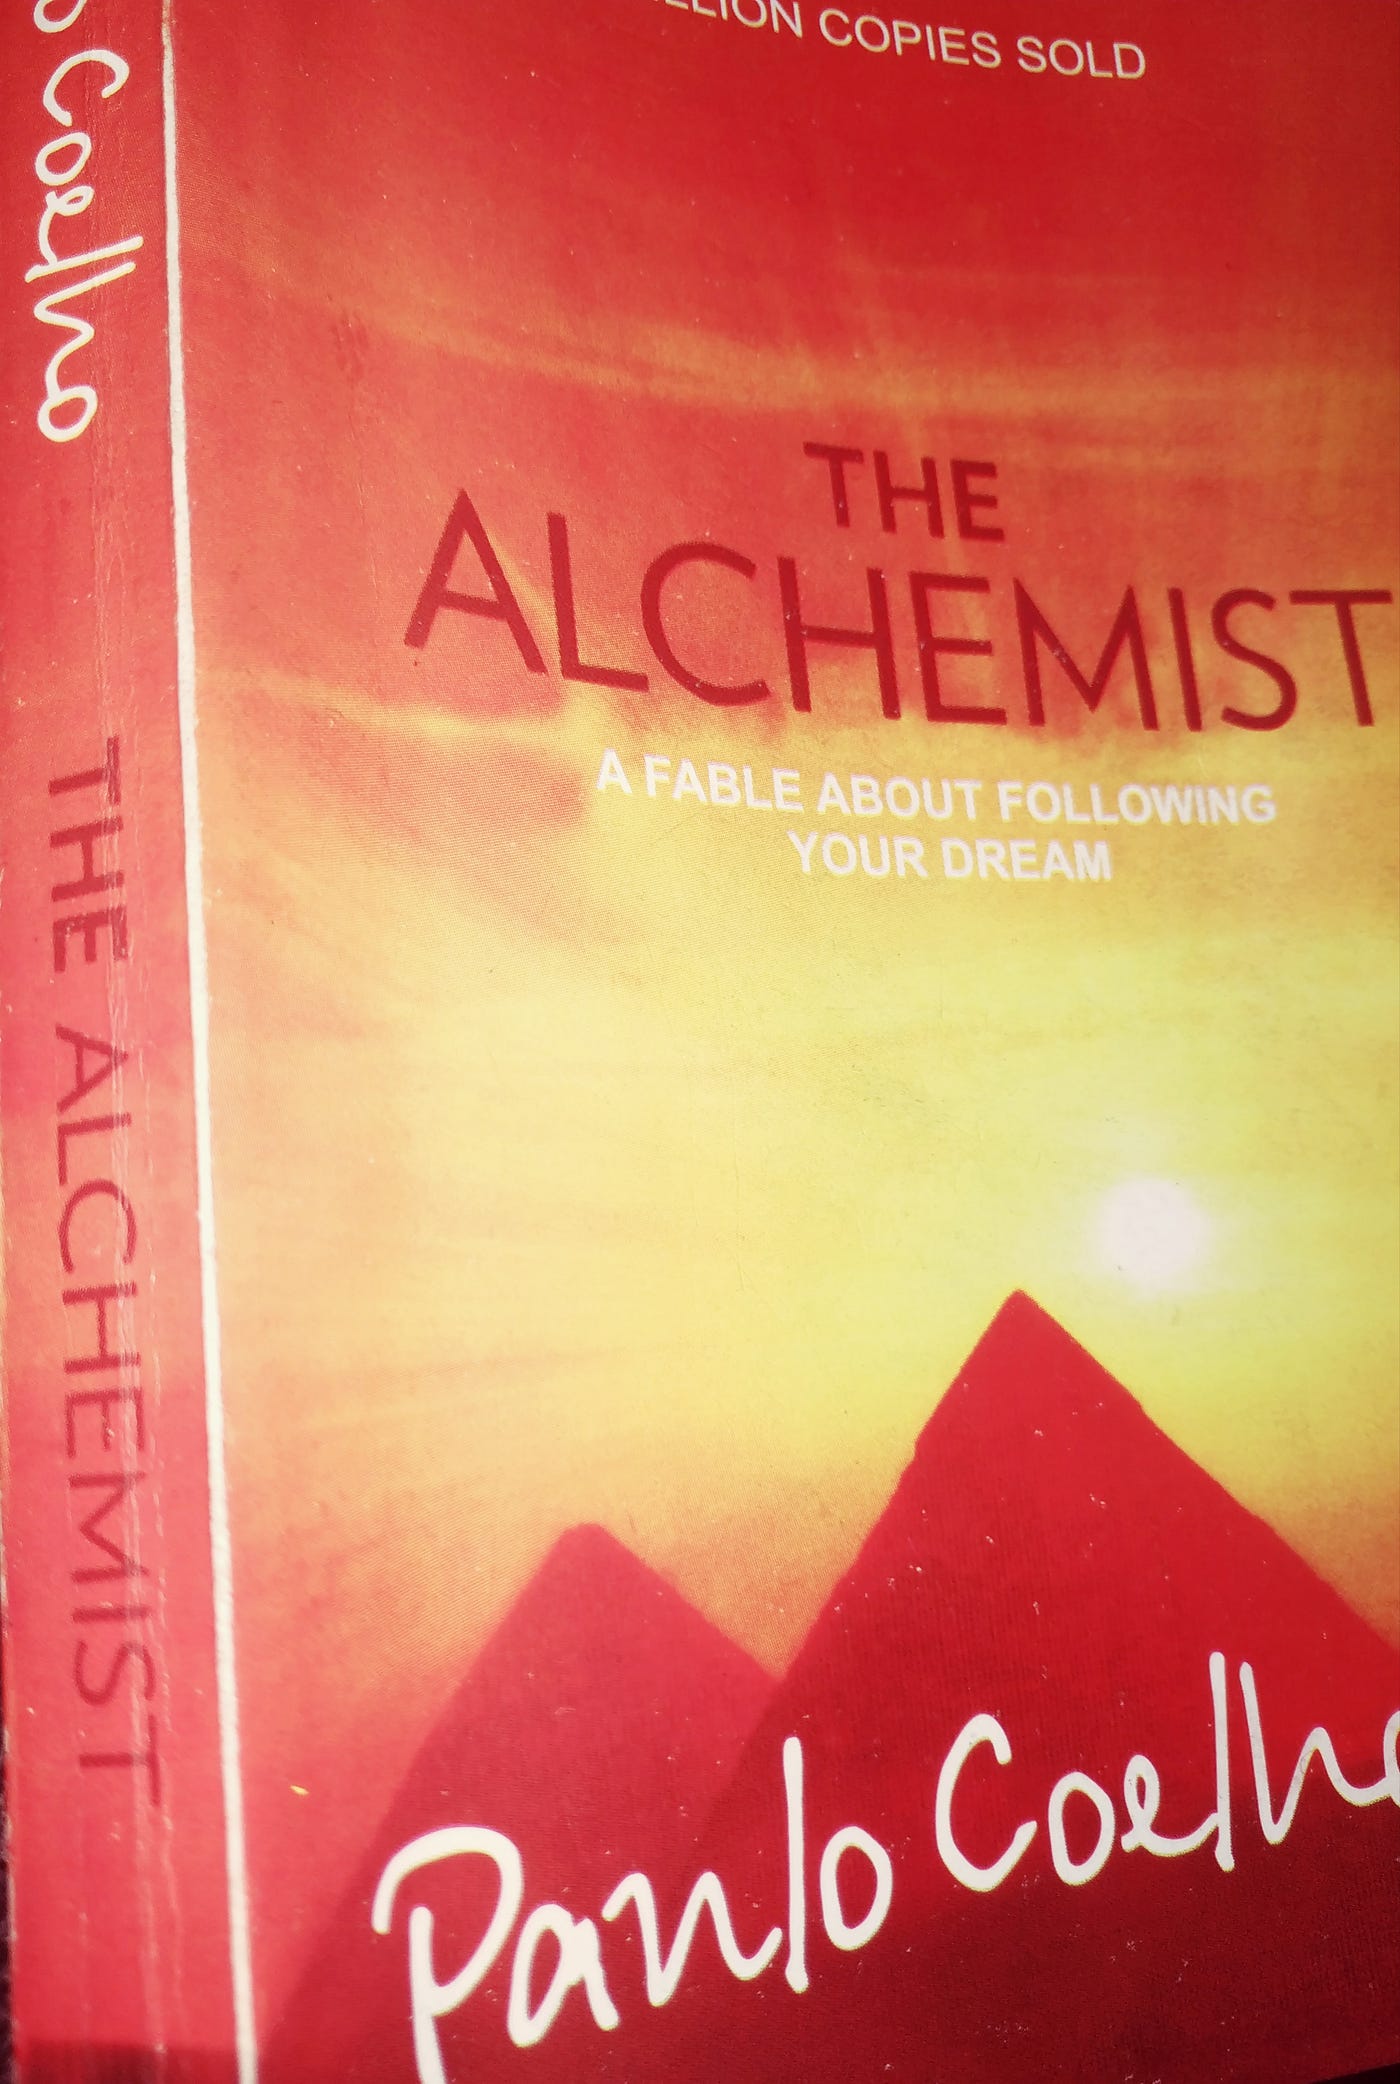 15 Things You Might Not Know About 'The Alchemist